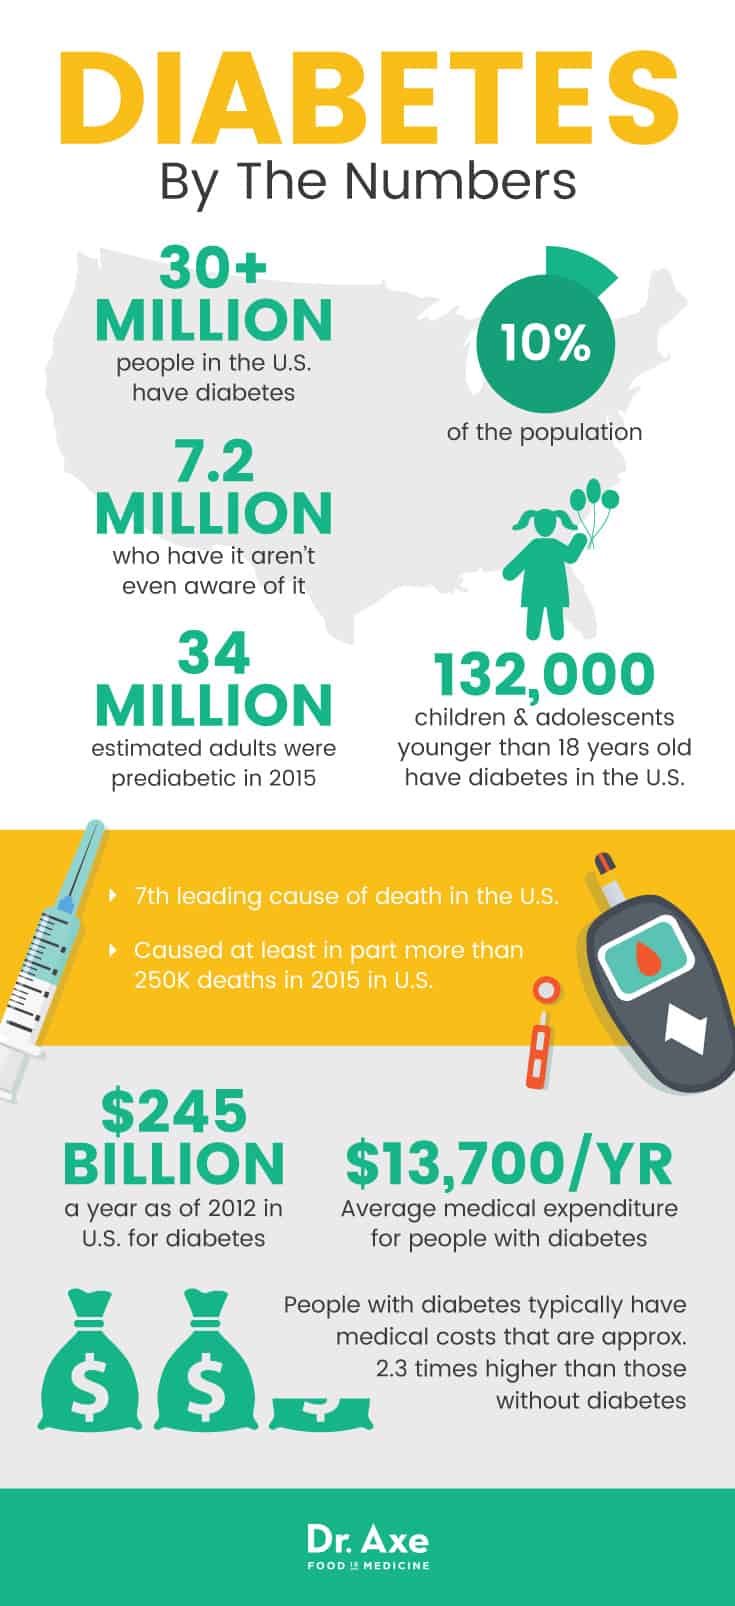 Diabetes by the numbers - Dr. Axe